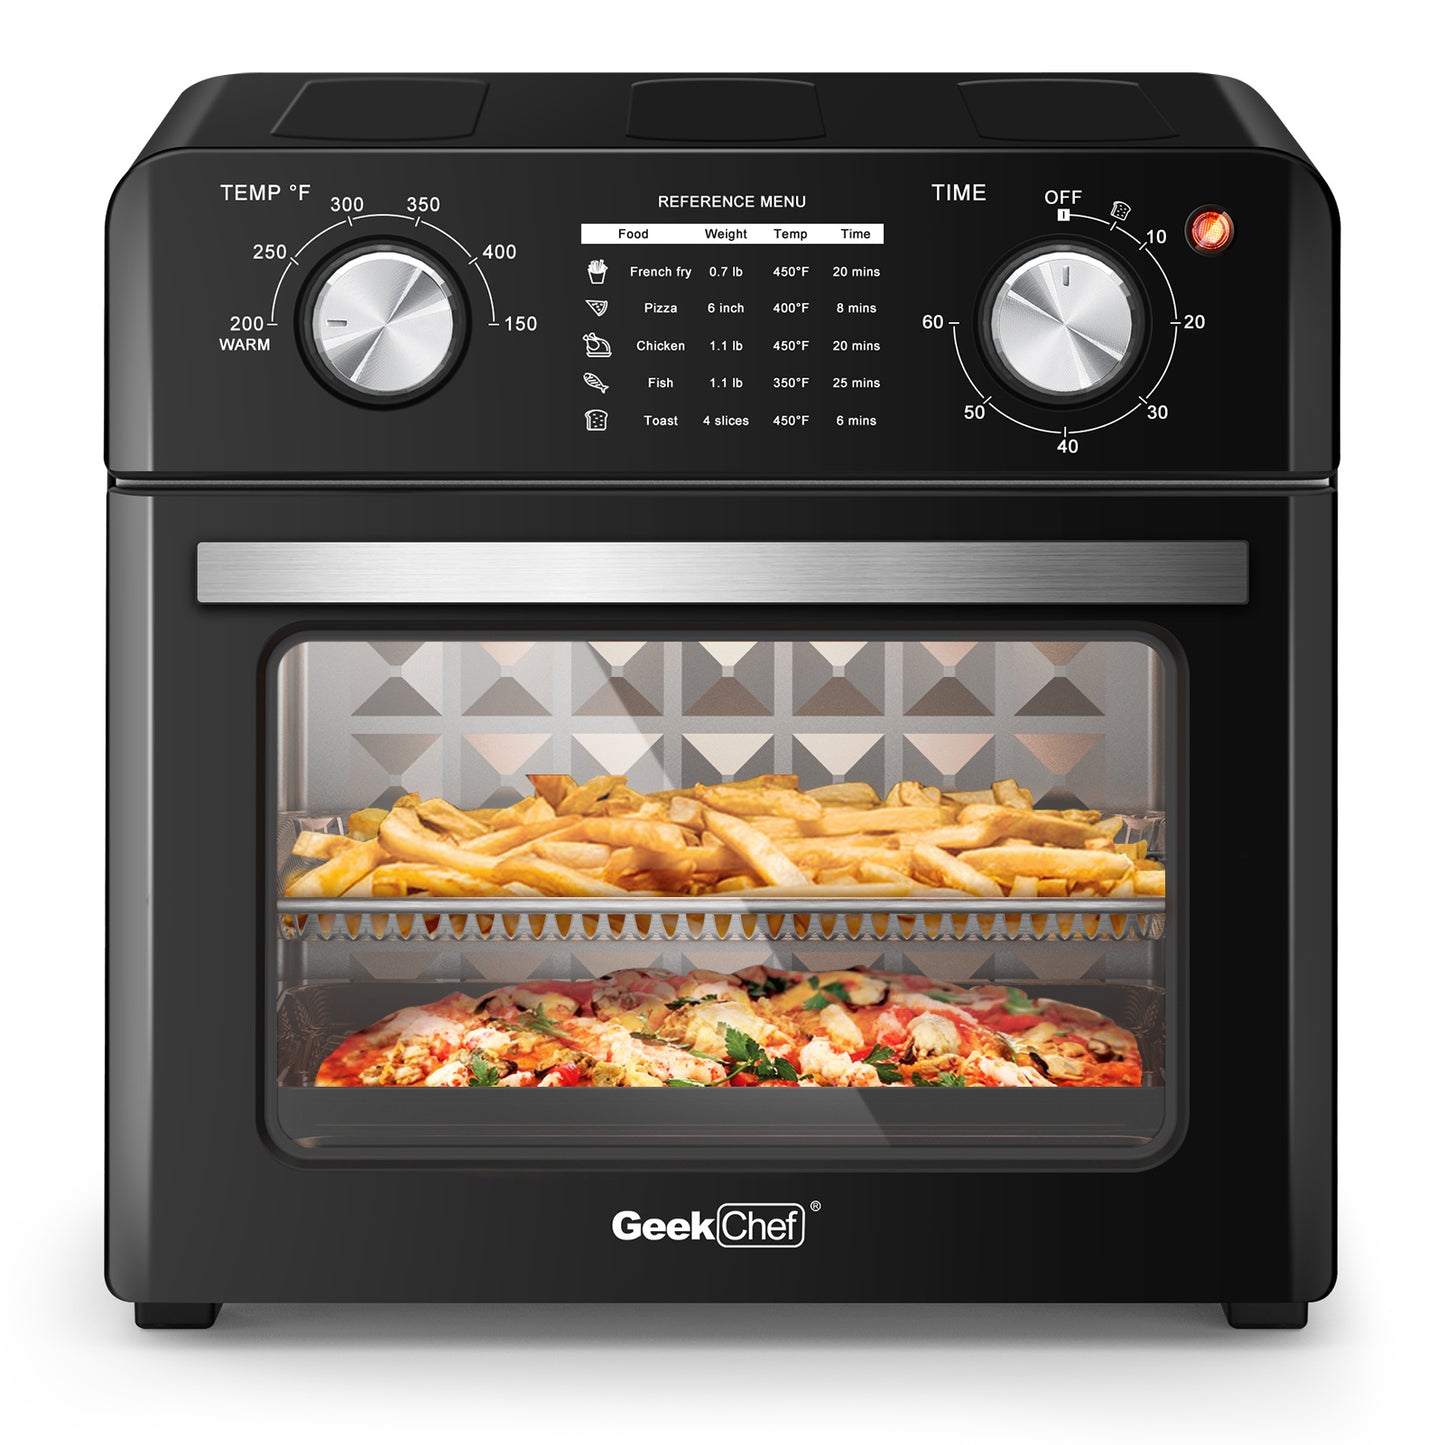 Geek Chef Air Fryer 10QT, Countertop Toaster Oven, 4 Slice Toaster Air Fryer Oven Warm, Broil, Toast, Bake, Air Fry, Oil-Free, Black Stainless Steel, Perfect For Countertop, Ban On Amazon